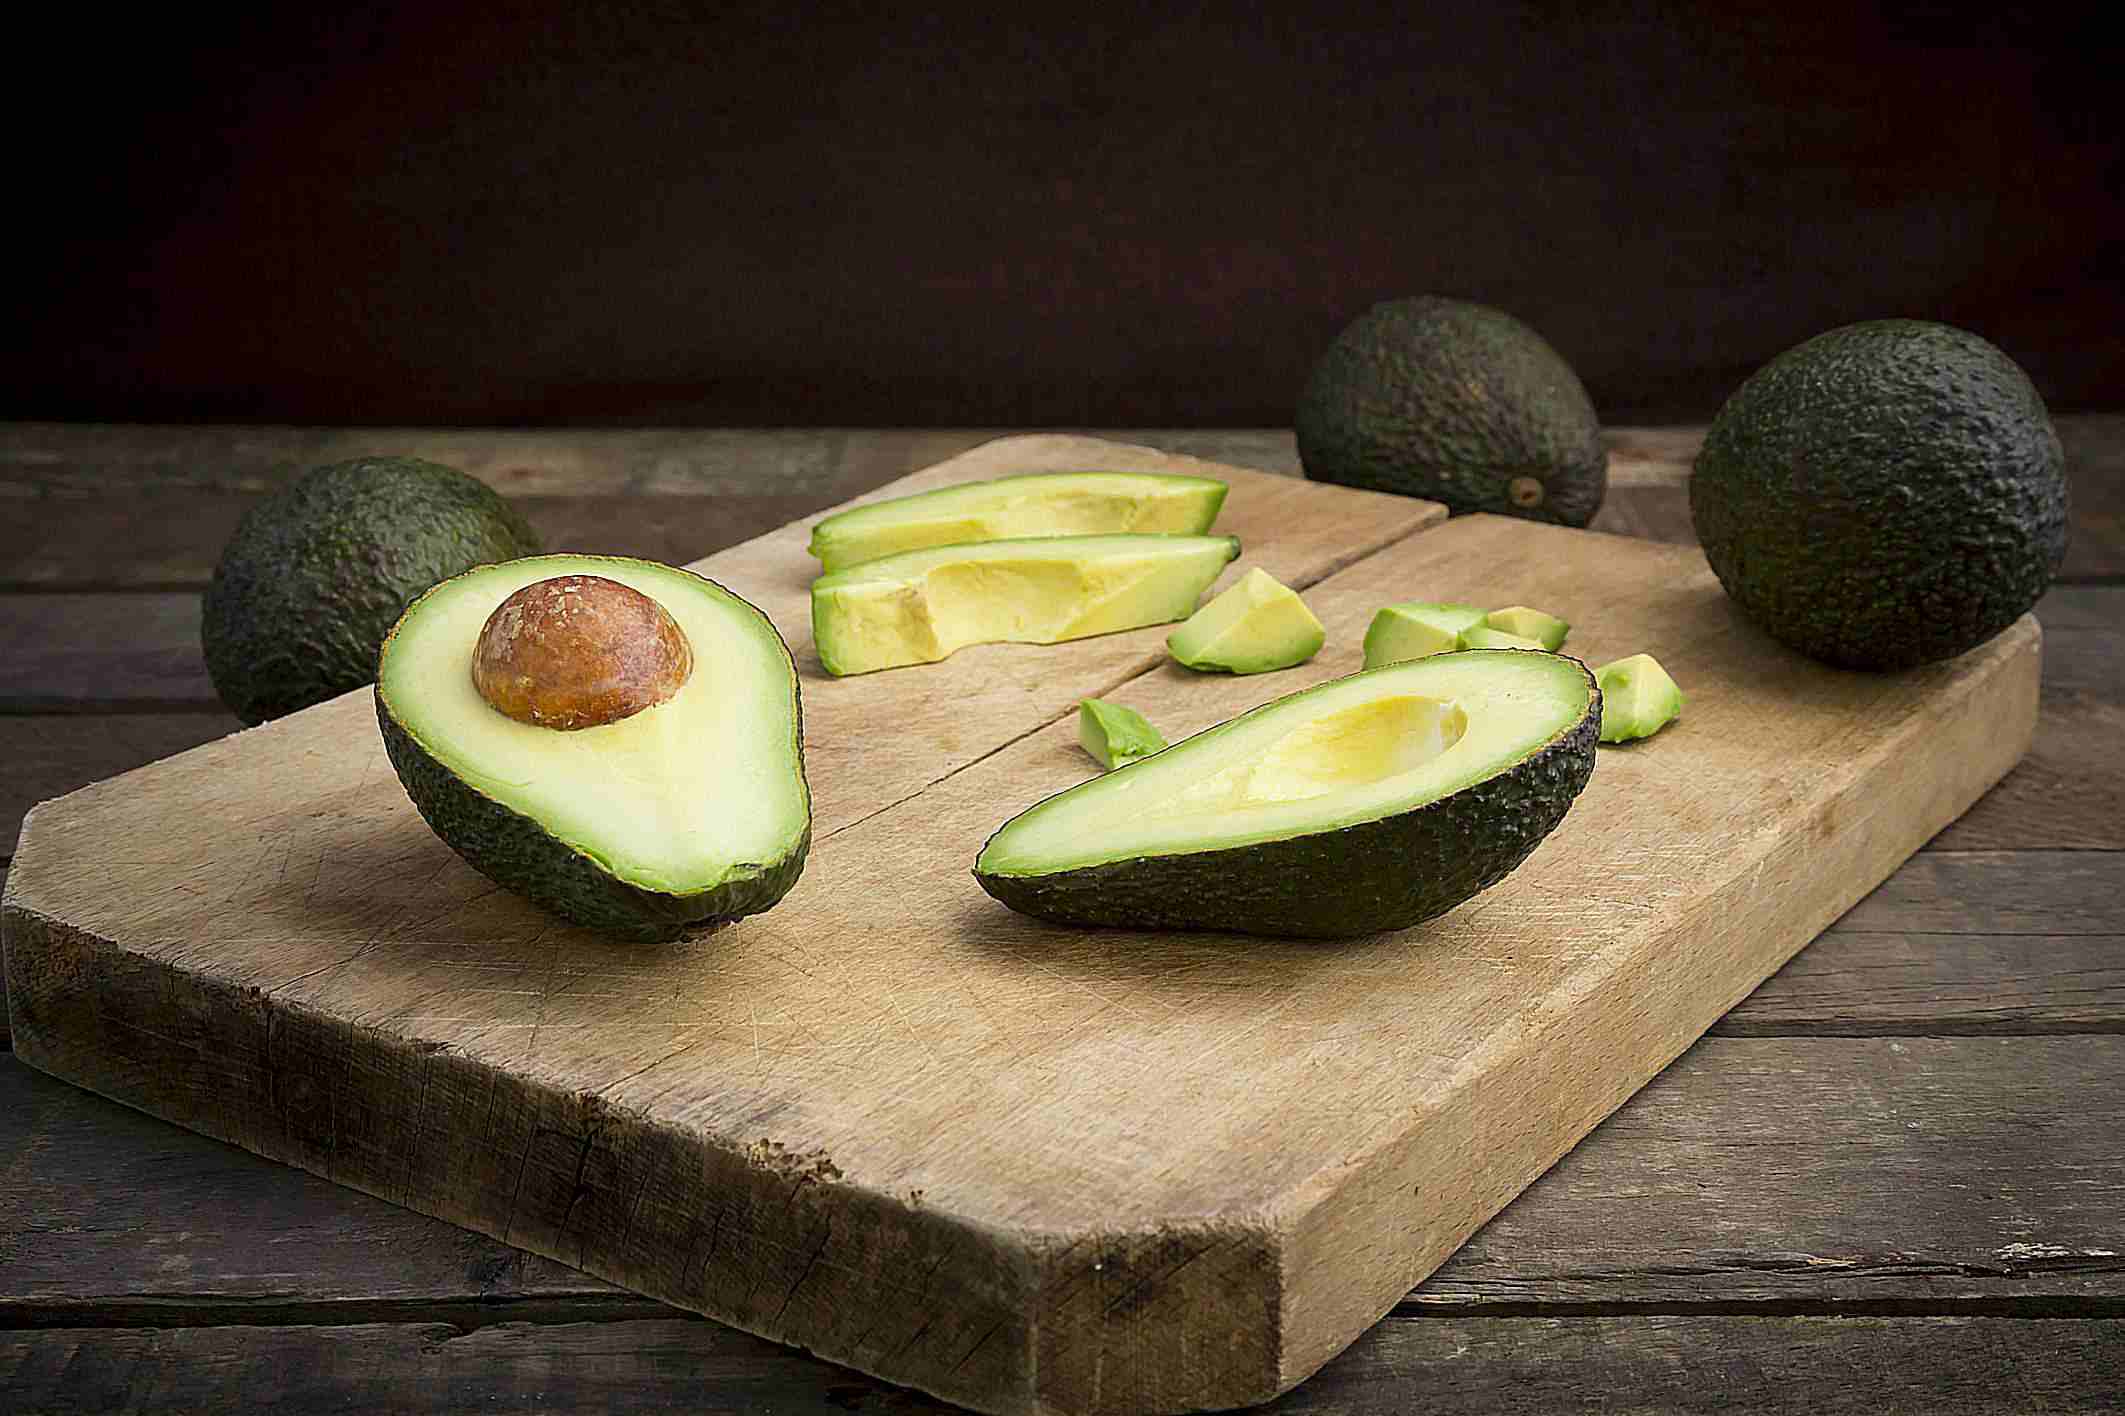 Full and cut up avocados on cutting board